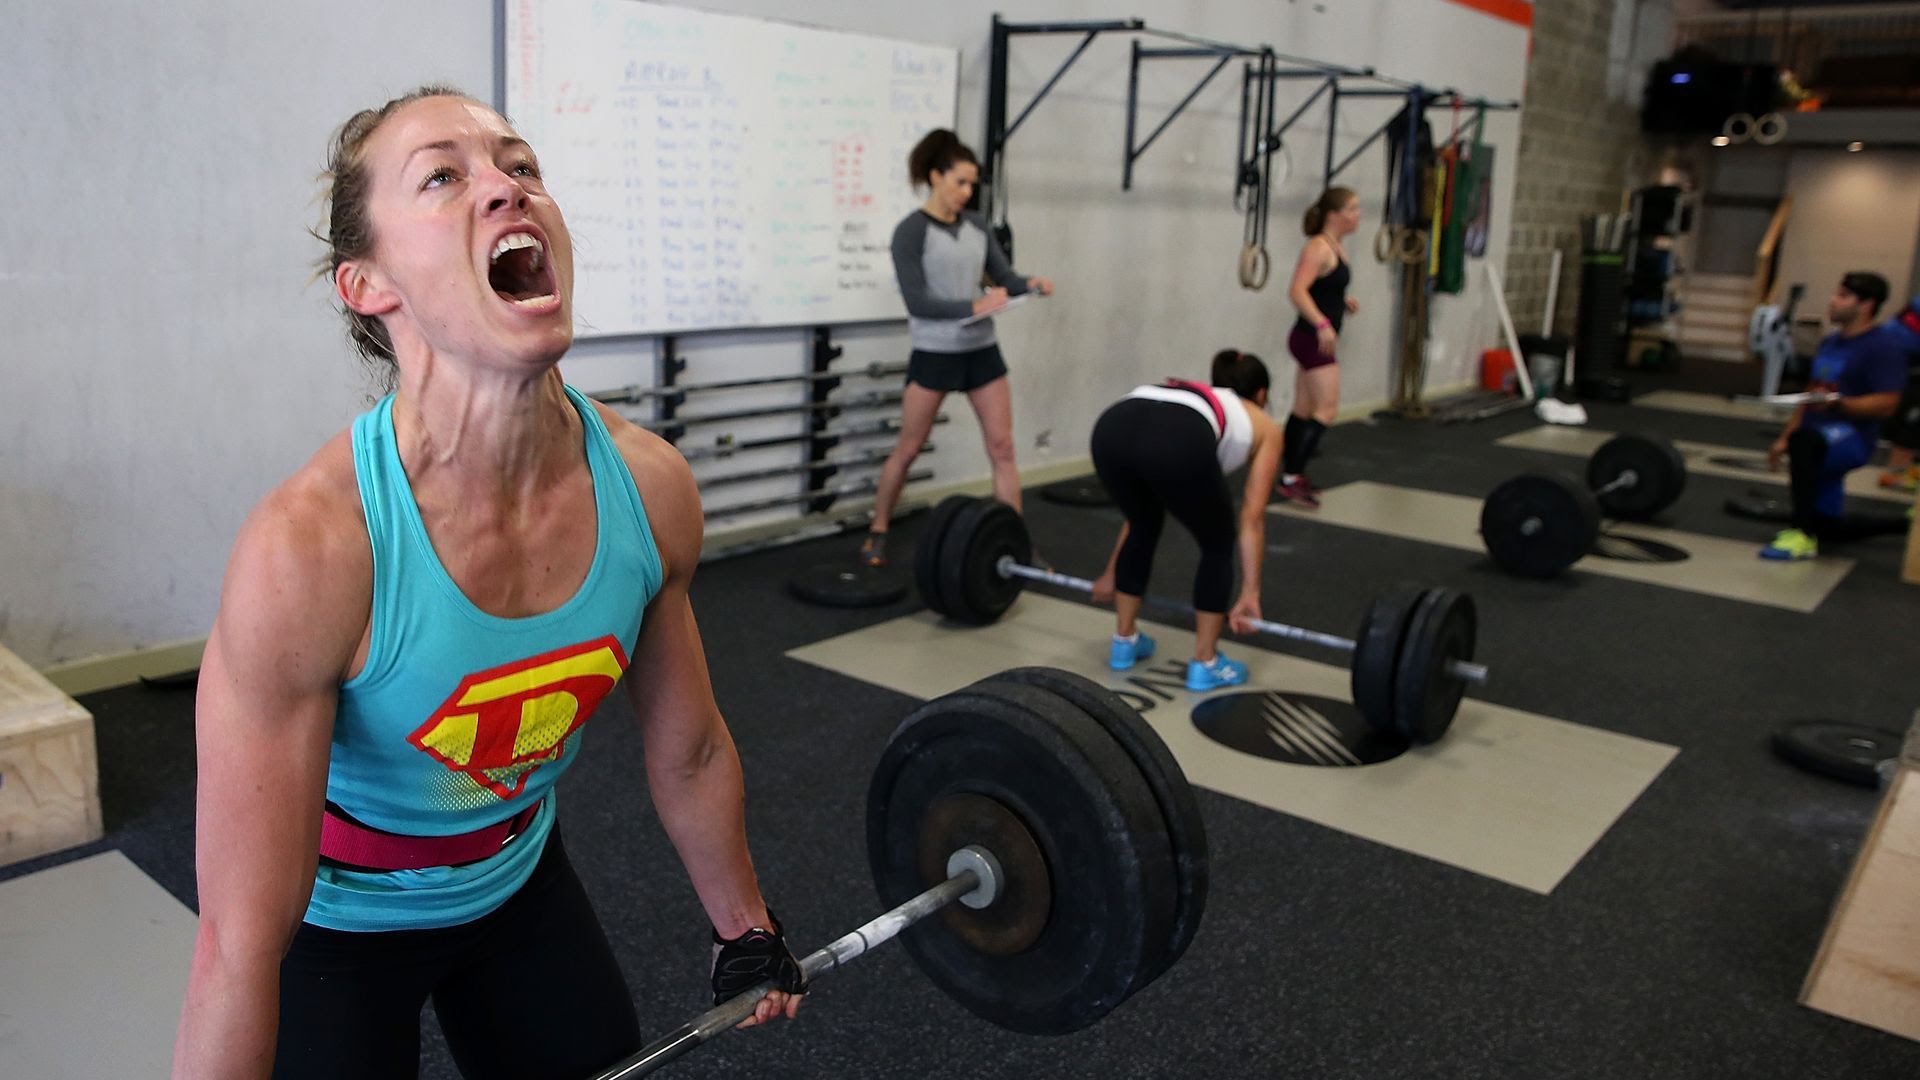 CrossFit faces mass exodus after CEO’s controversial George Floyd tweet